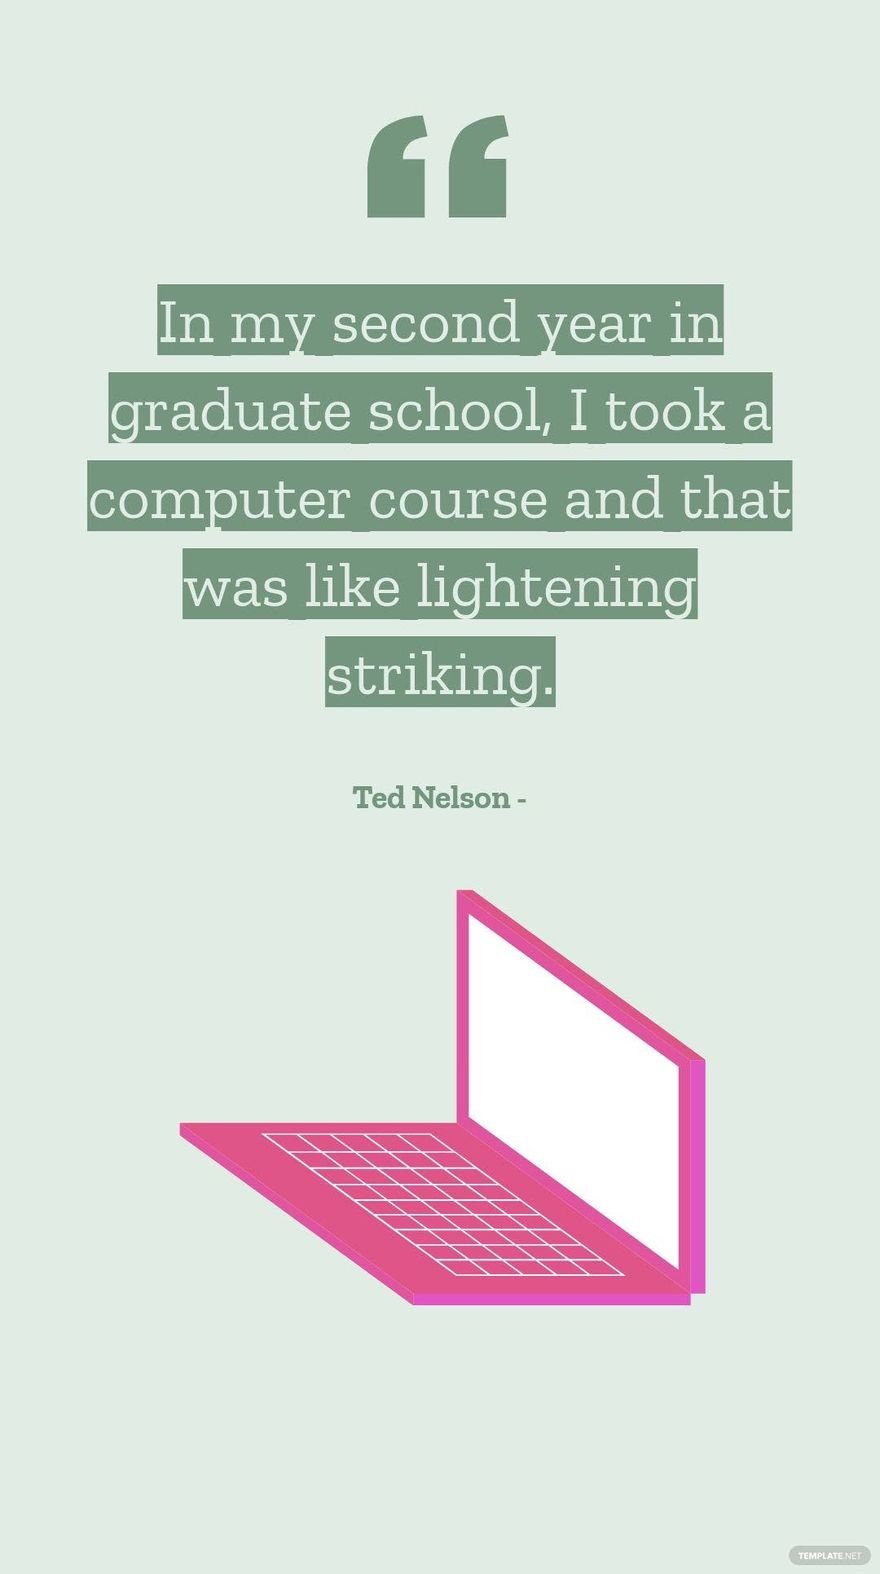 Free Ted Nelson - In my second year in graduate school, I took a computer course and that was like lightening striking. in JPG